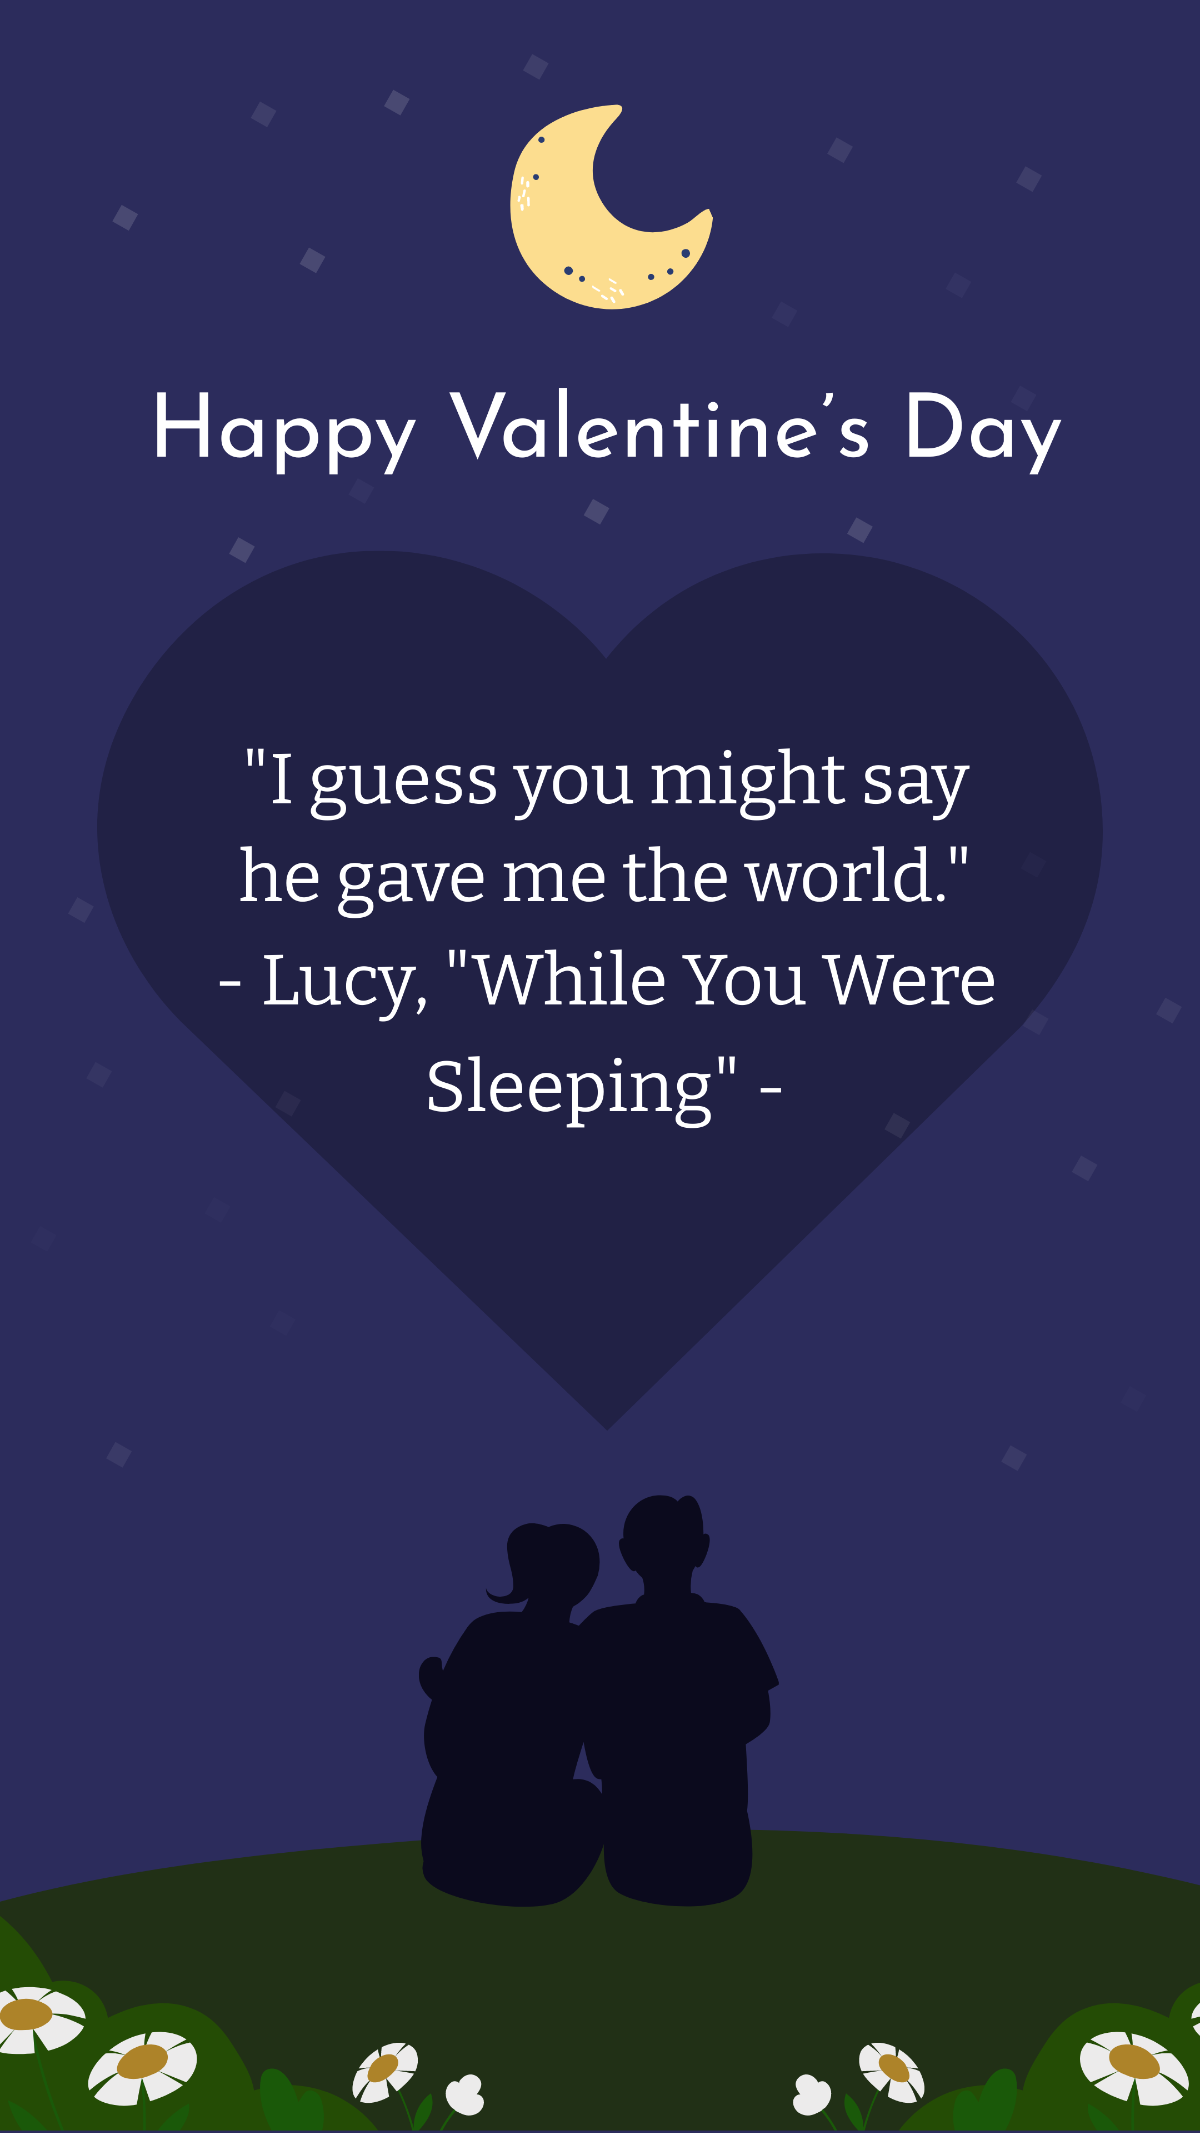 Cute Valentine's Day Quotes for Husband Template